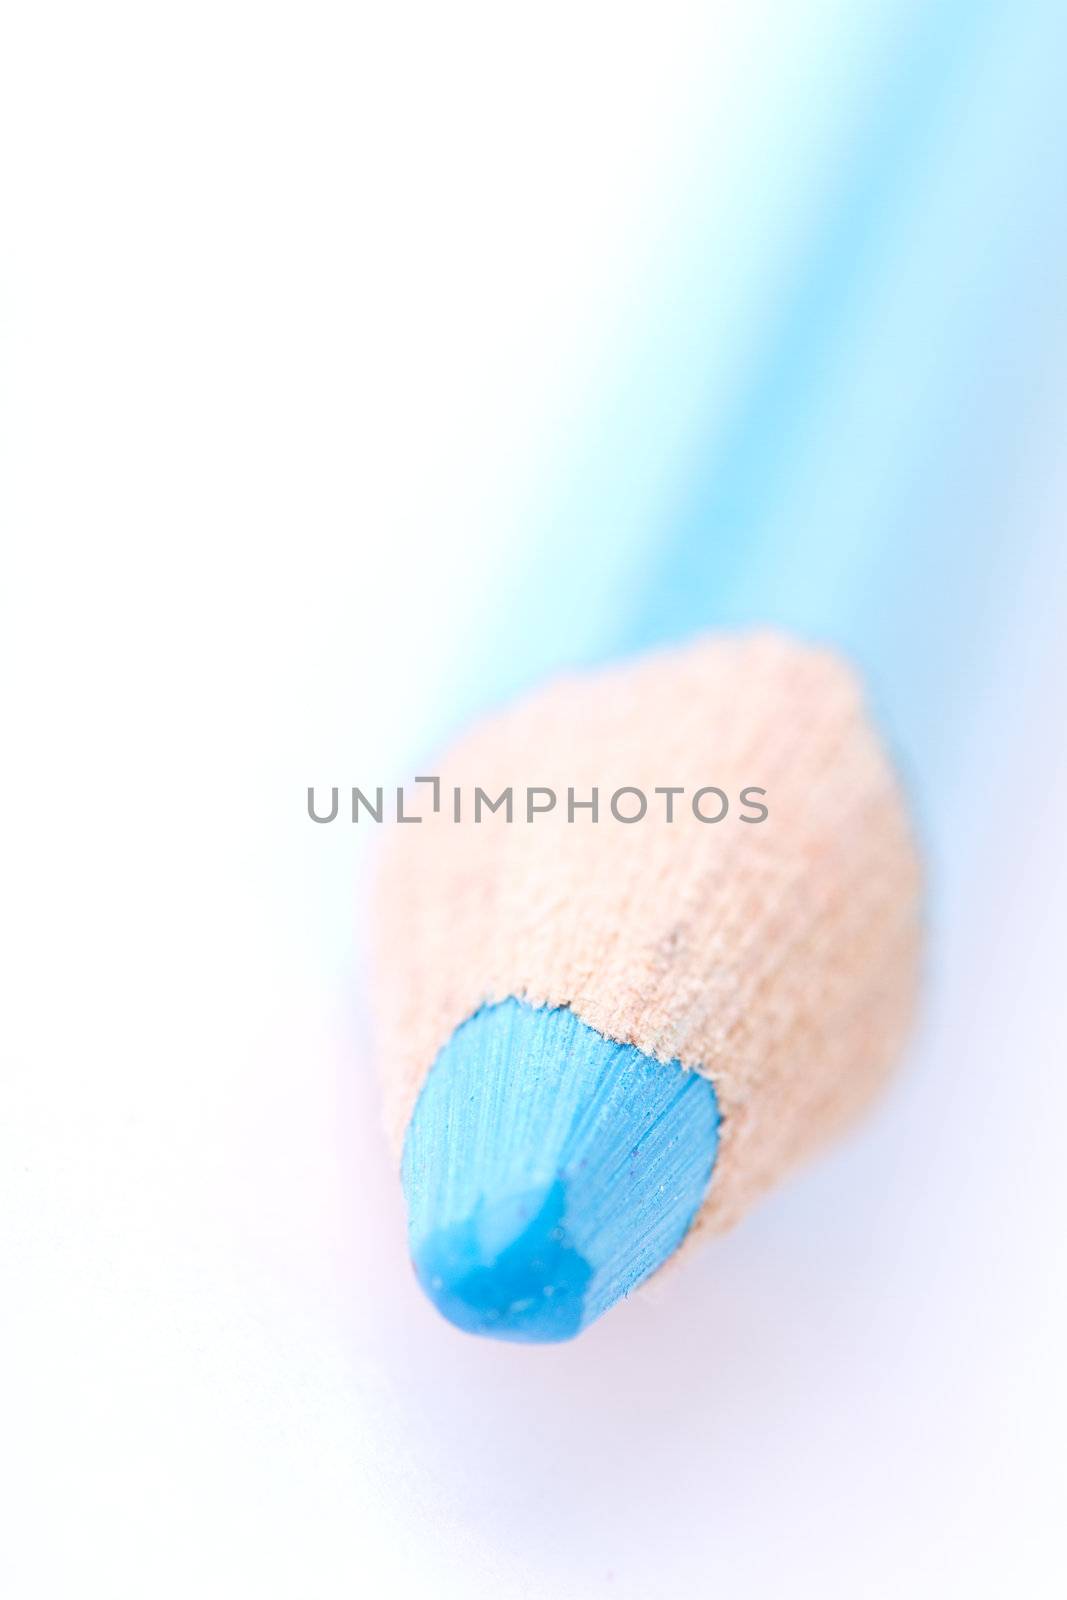 Closeup of a blue crayon isolated on a white backgrund. Has a shallow depth of field.